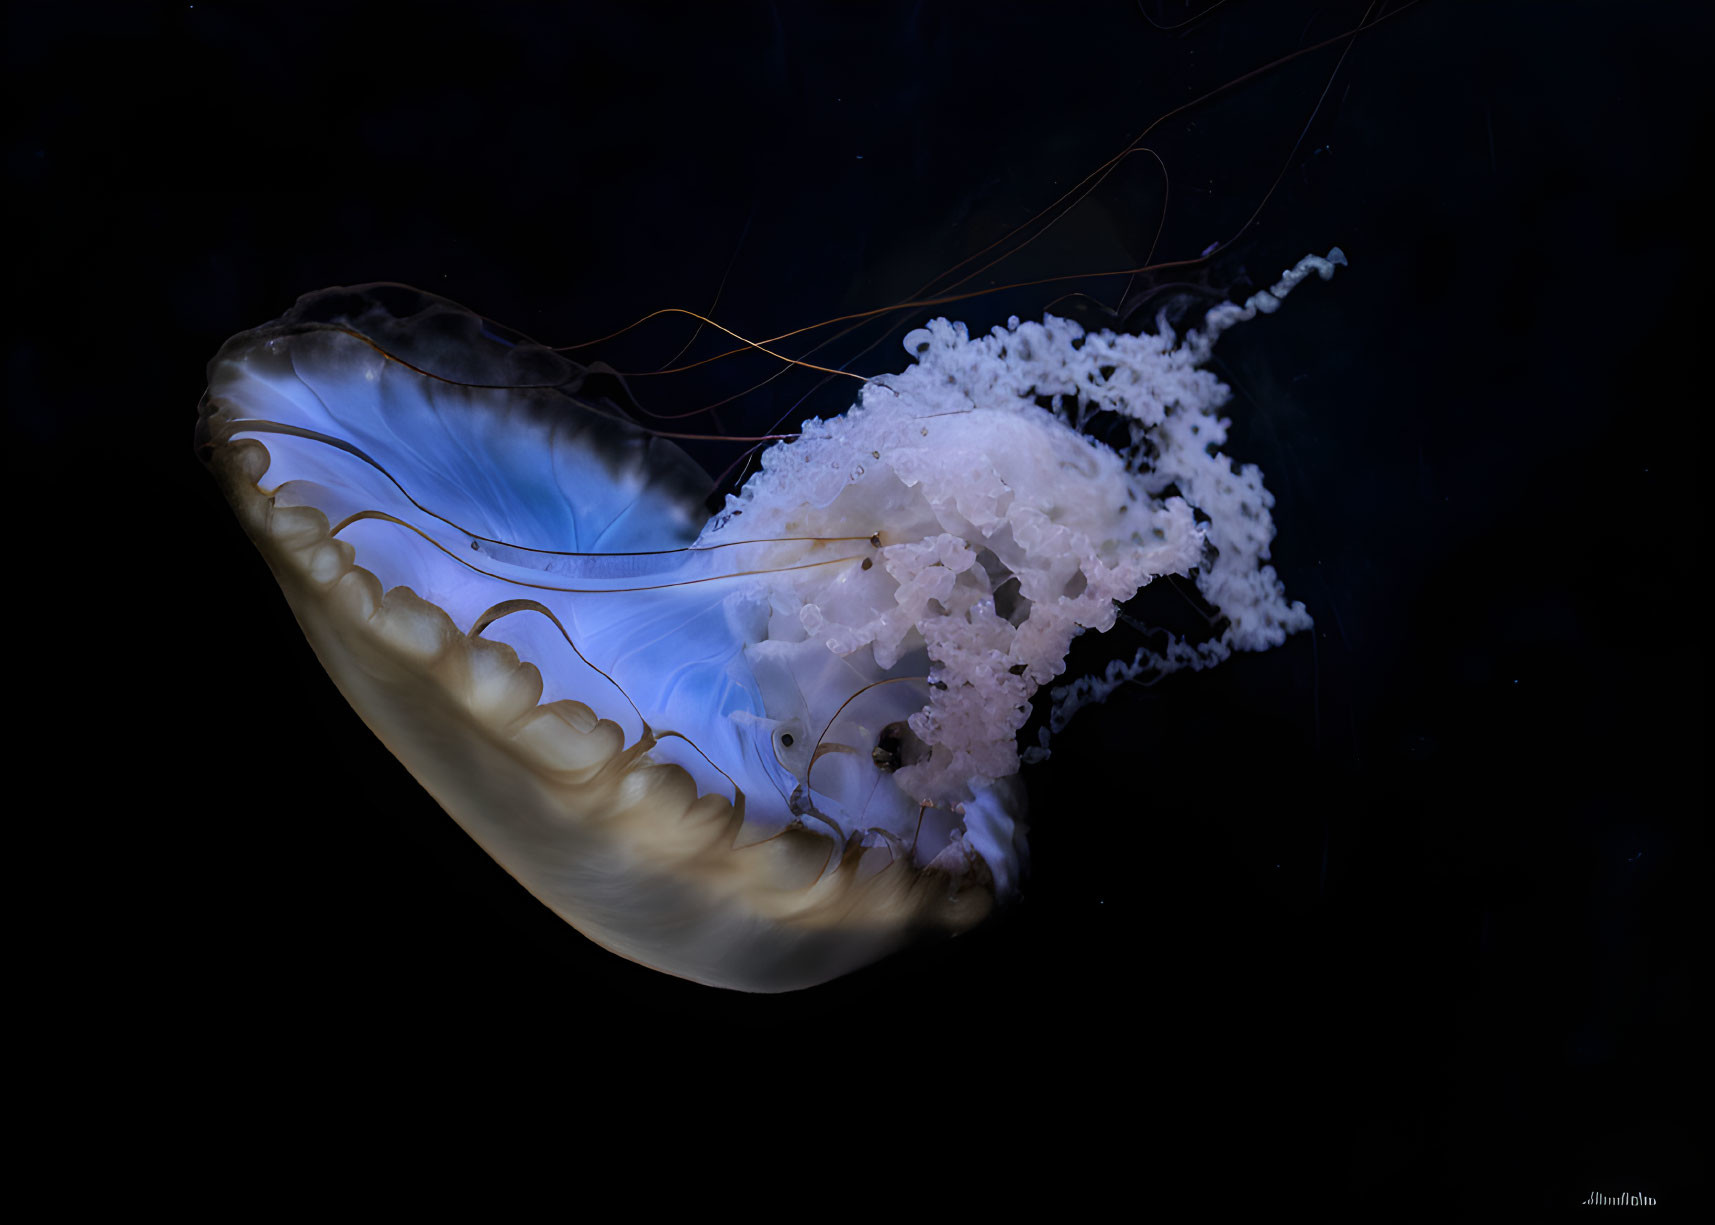 Translucent jellyfish with glowing blue bell and trailing tentacles